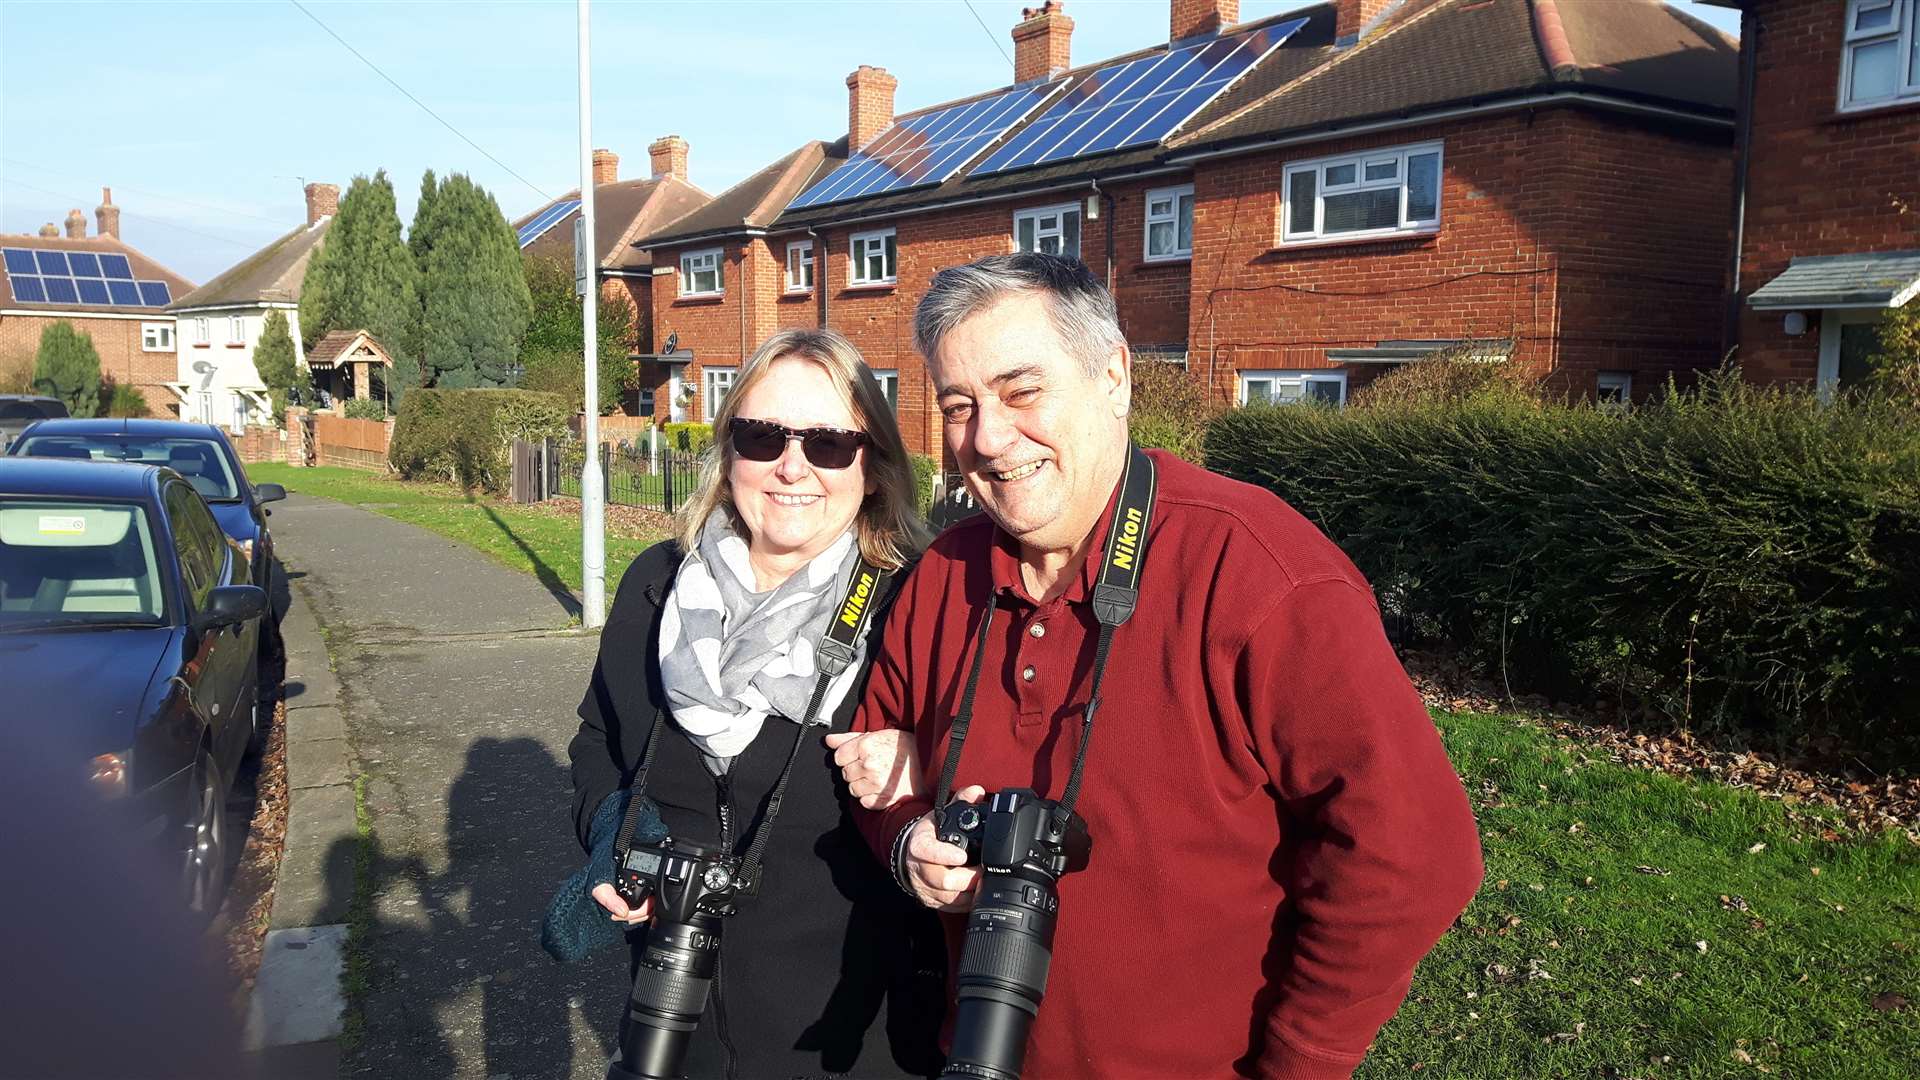 Jenny LeBeau and Tim Ballard were among the birdwatchers who descended on Coldharbour Road